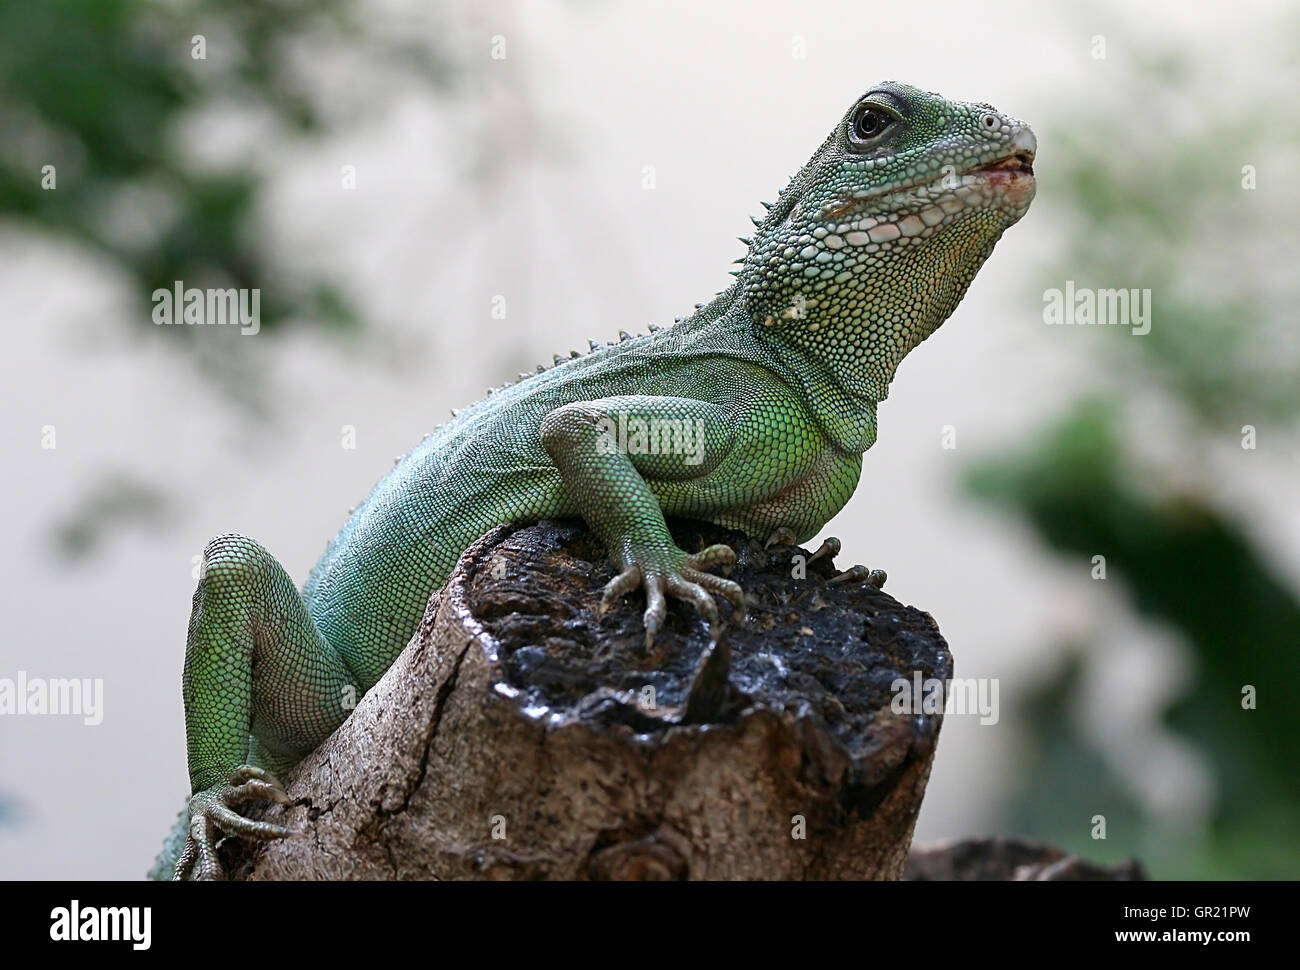 Chinese or Asian Green Water Dragon (Physignathus cocincinus) posing on a tree stump Stock Photo